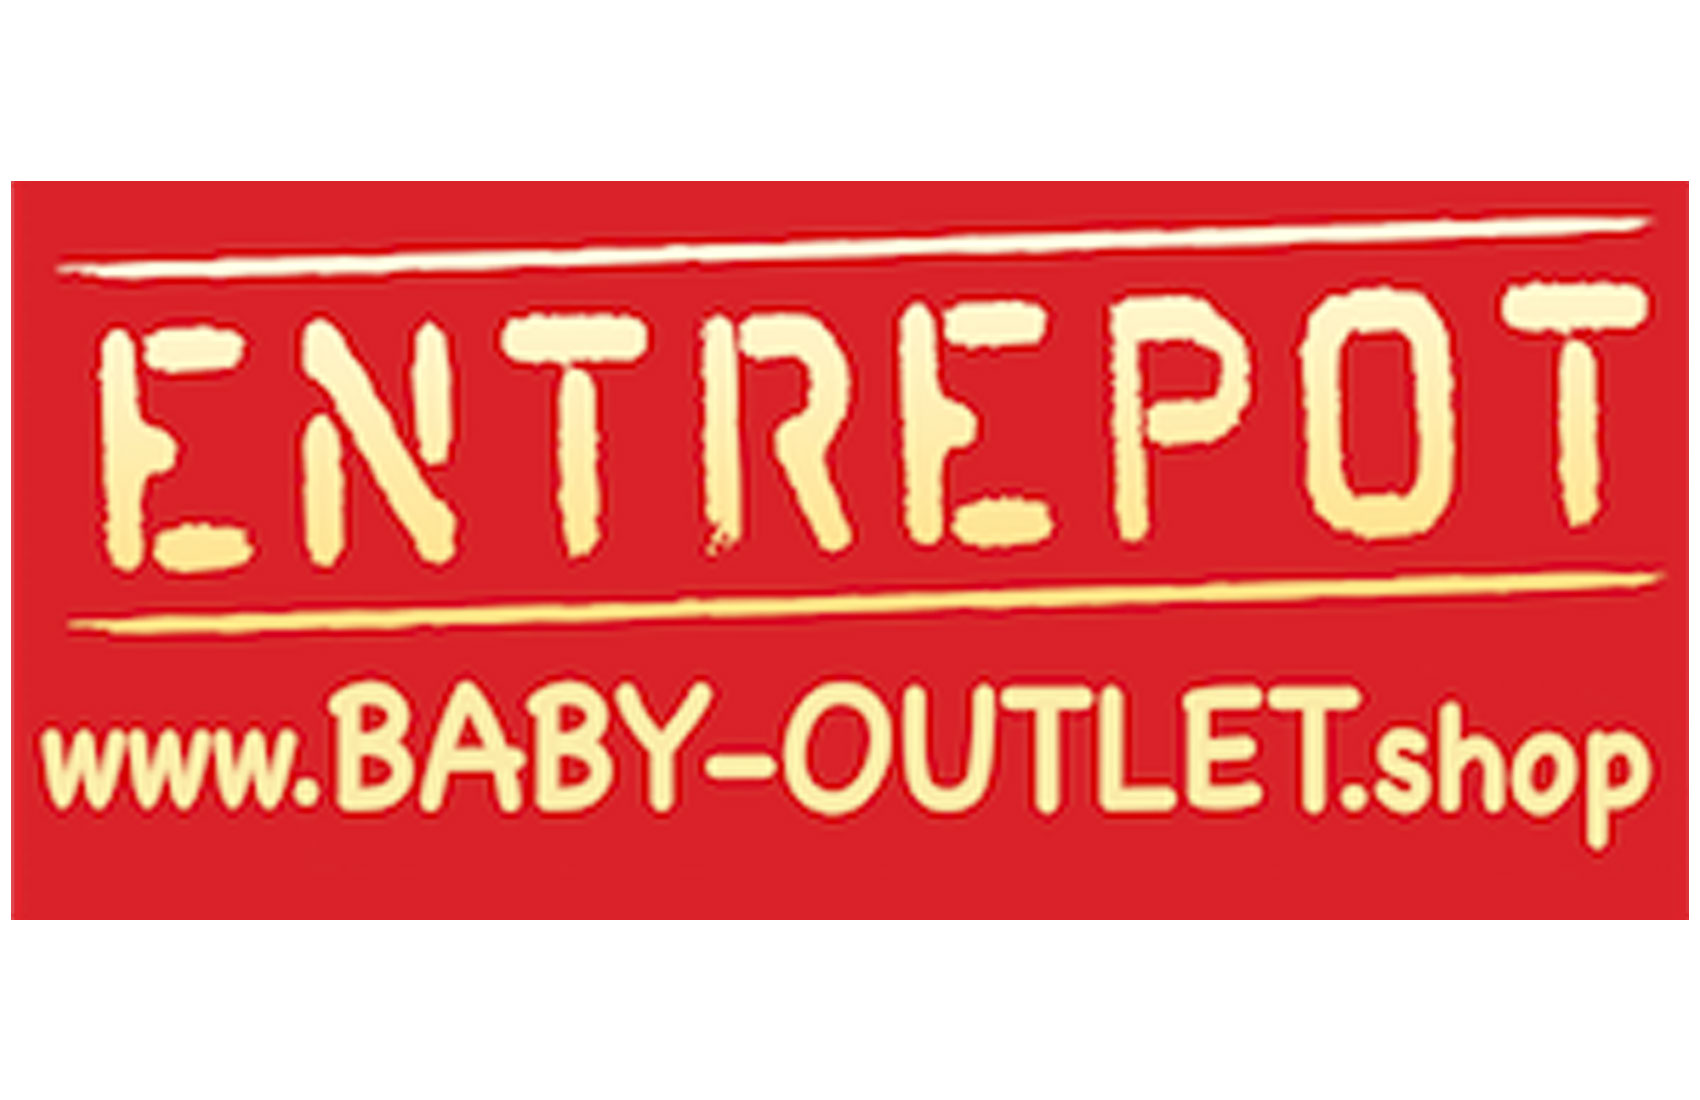 Entrepot Baby Outlet